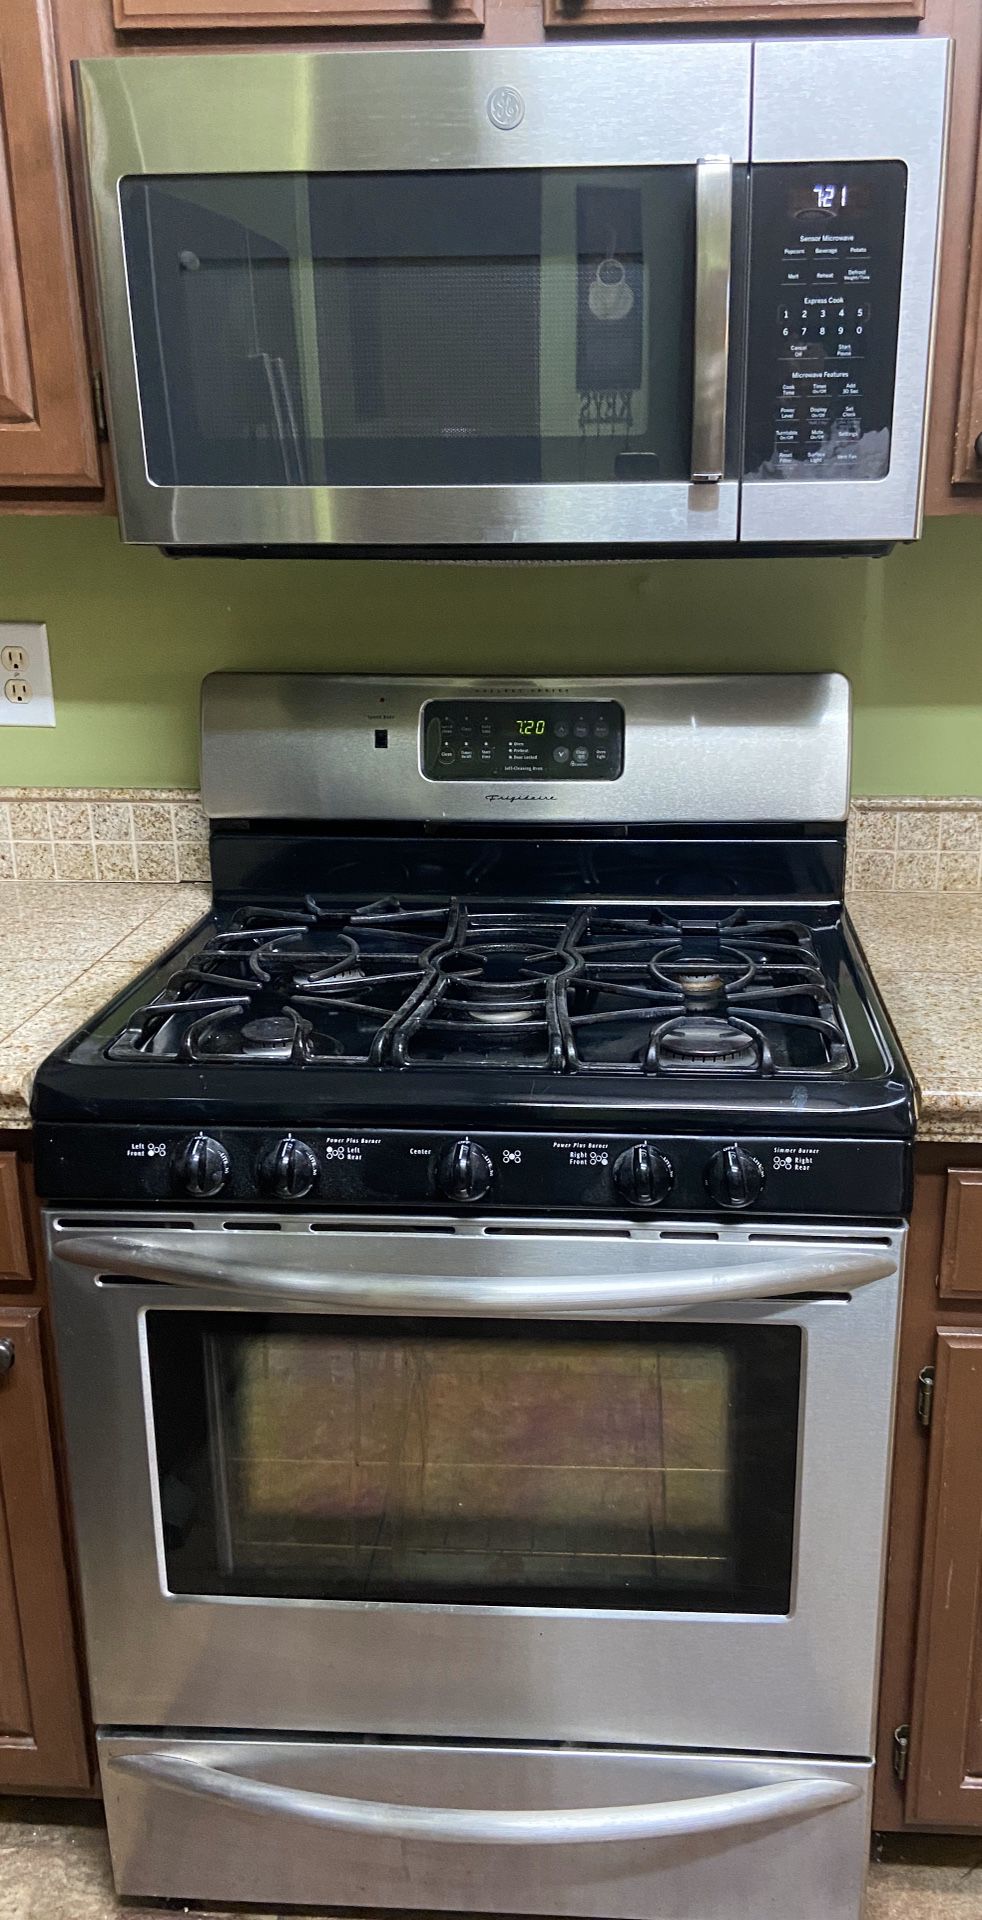 Stainless steel Gas Stove and Dishwasher $325. Microwave and fridge are sold.